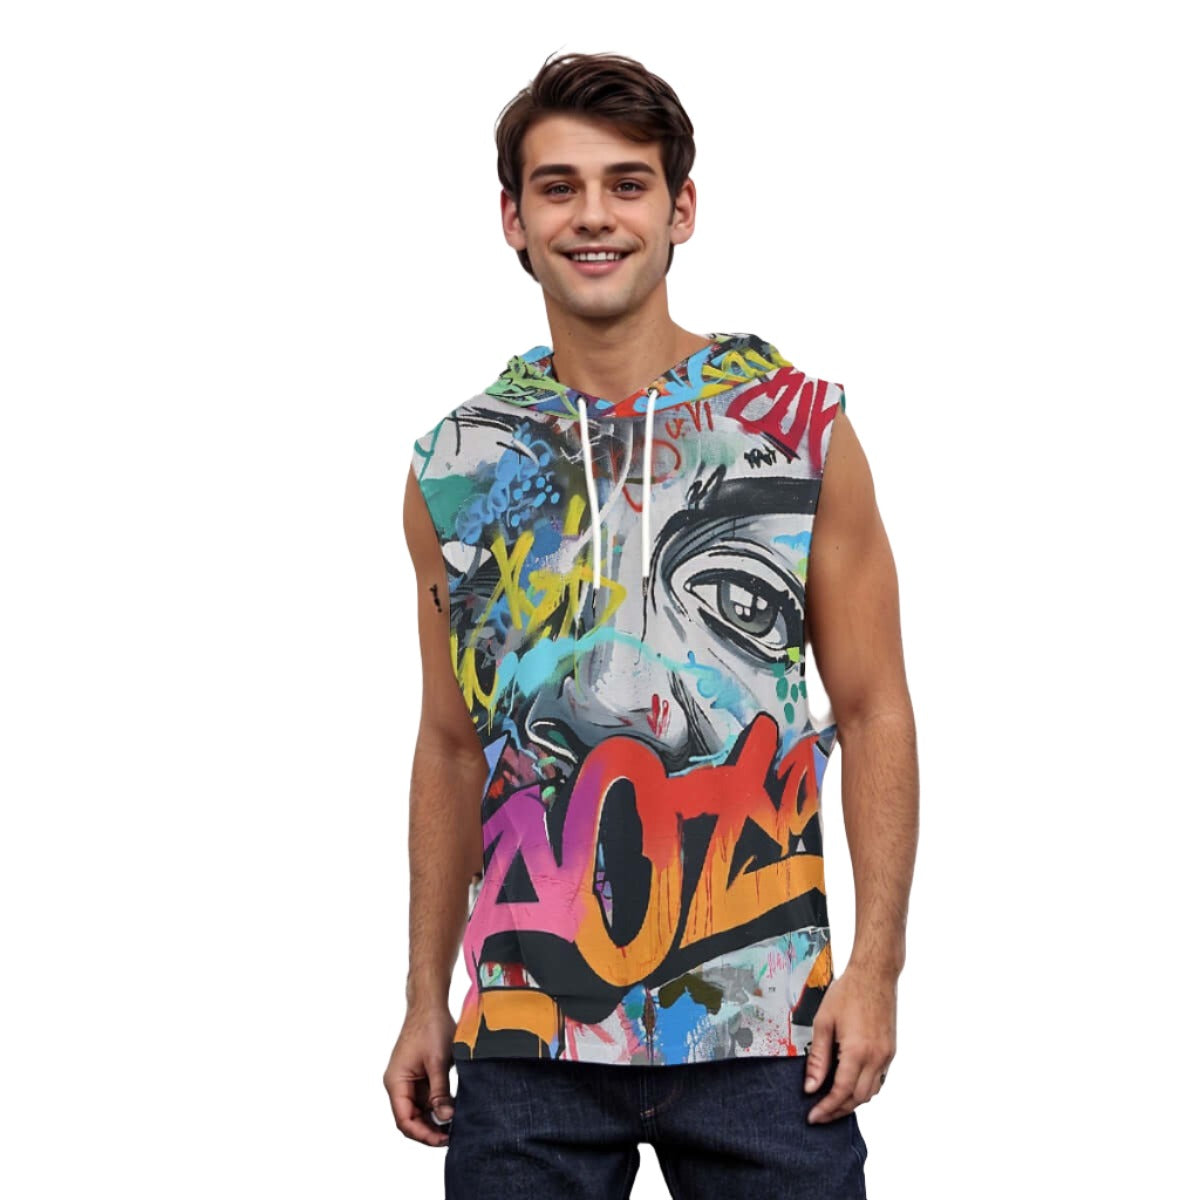 Personlized Gift for Men Sleeveless Pullover Hoodie - Archiify